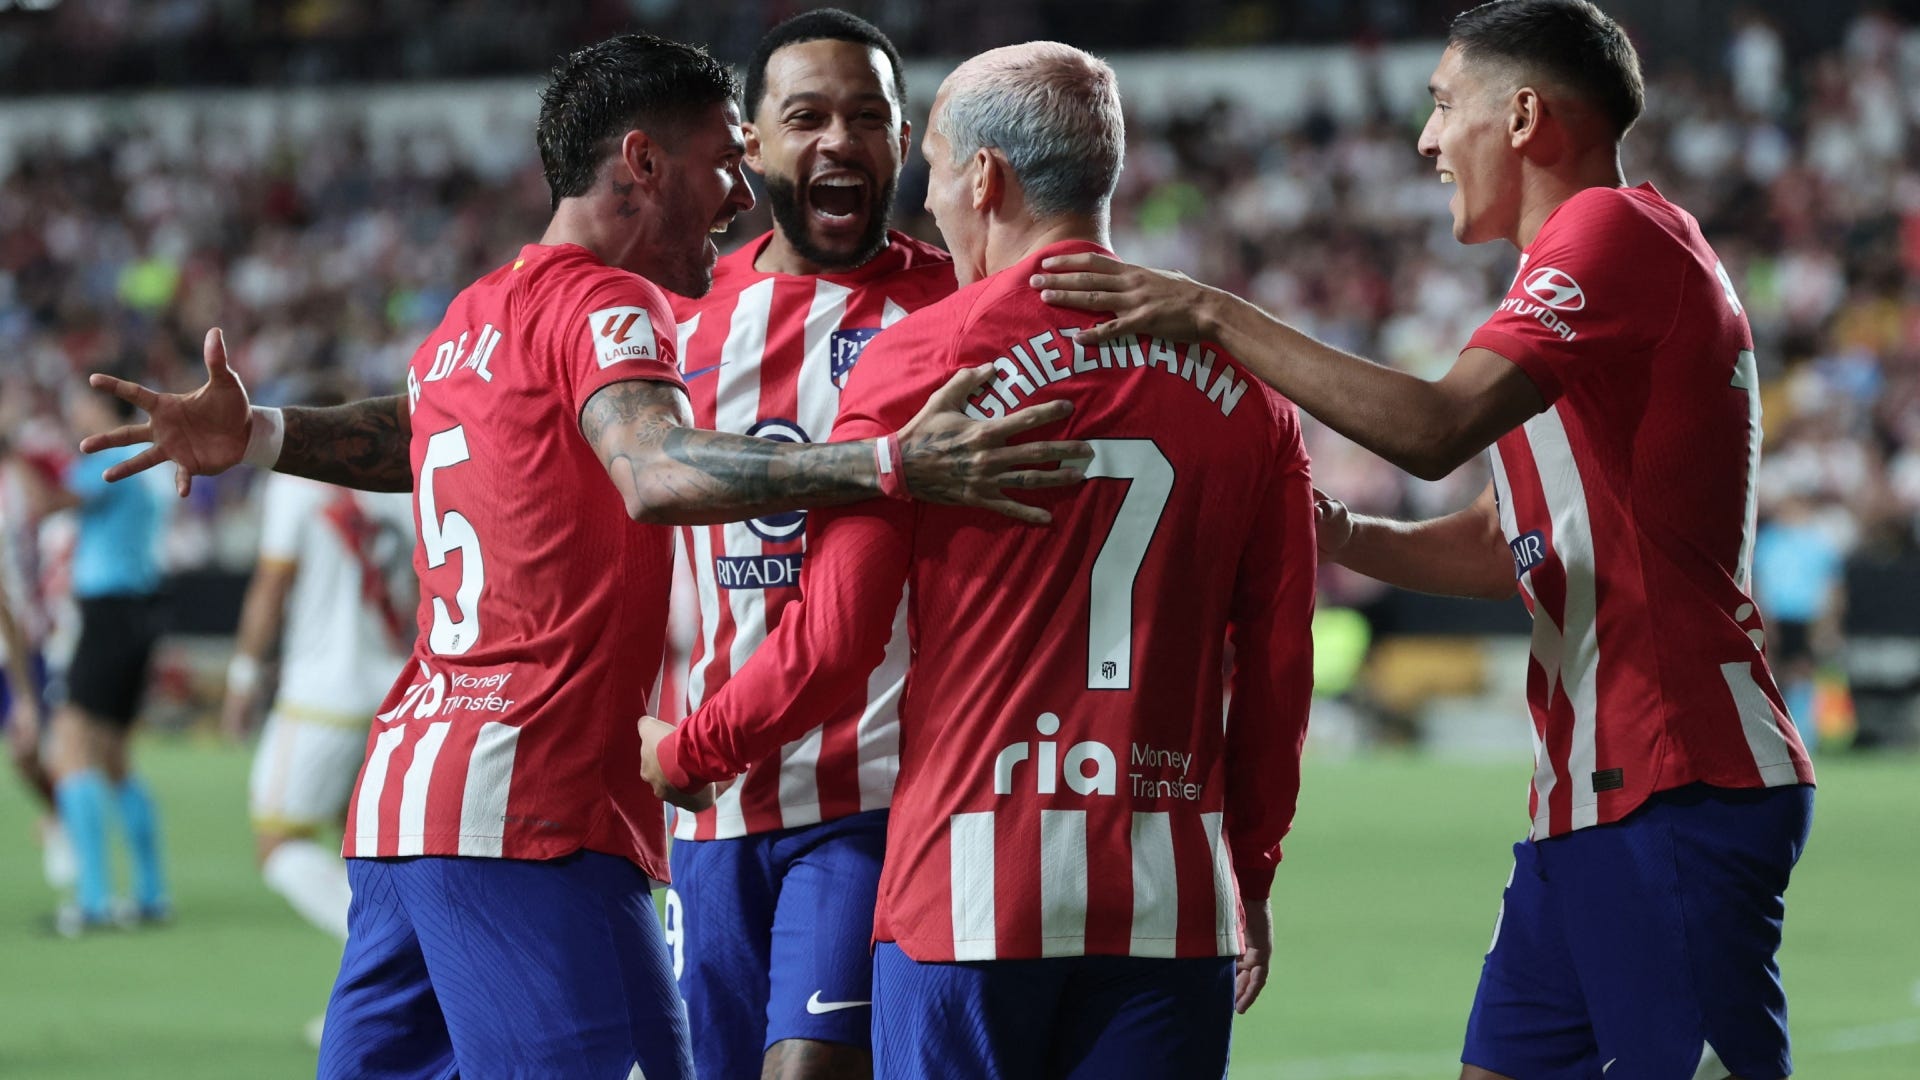 Atlético vs Sevilla Where to watch the match online, live stream, TV channels, and kick-off time Goal UK